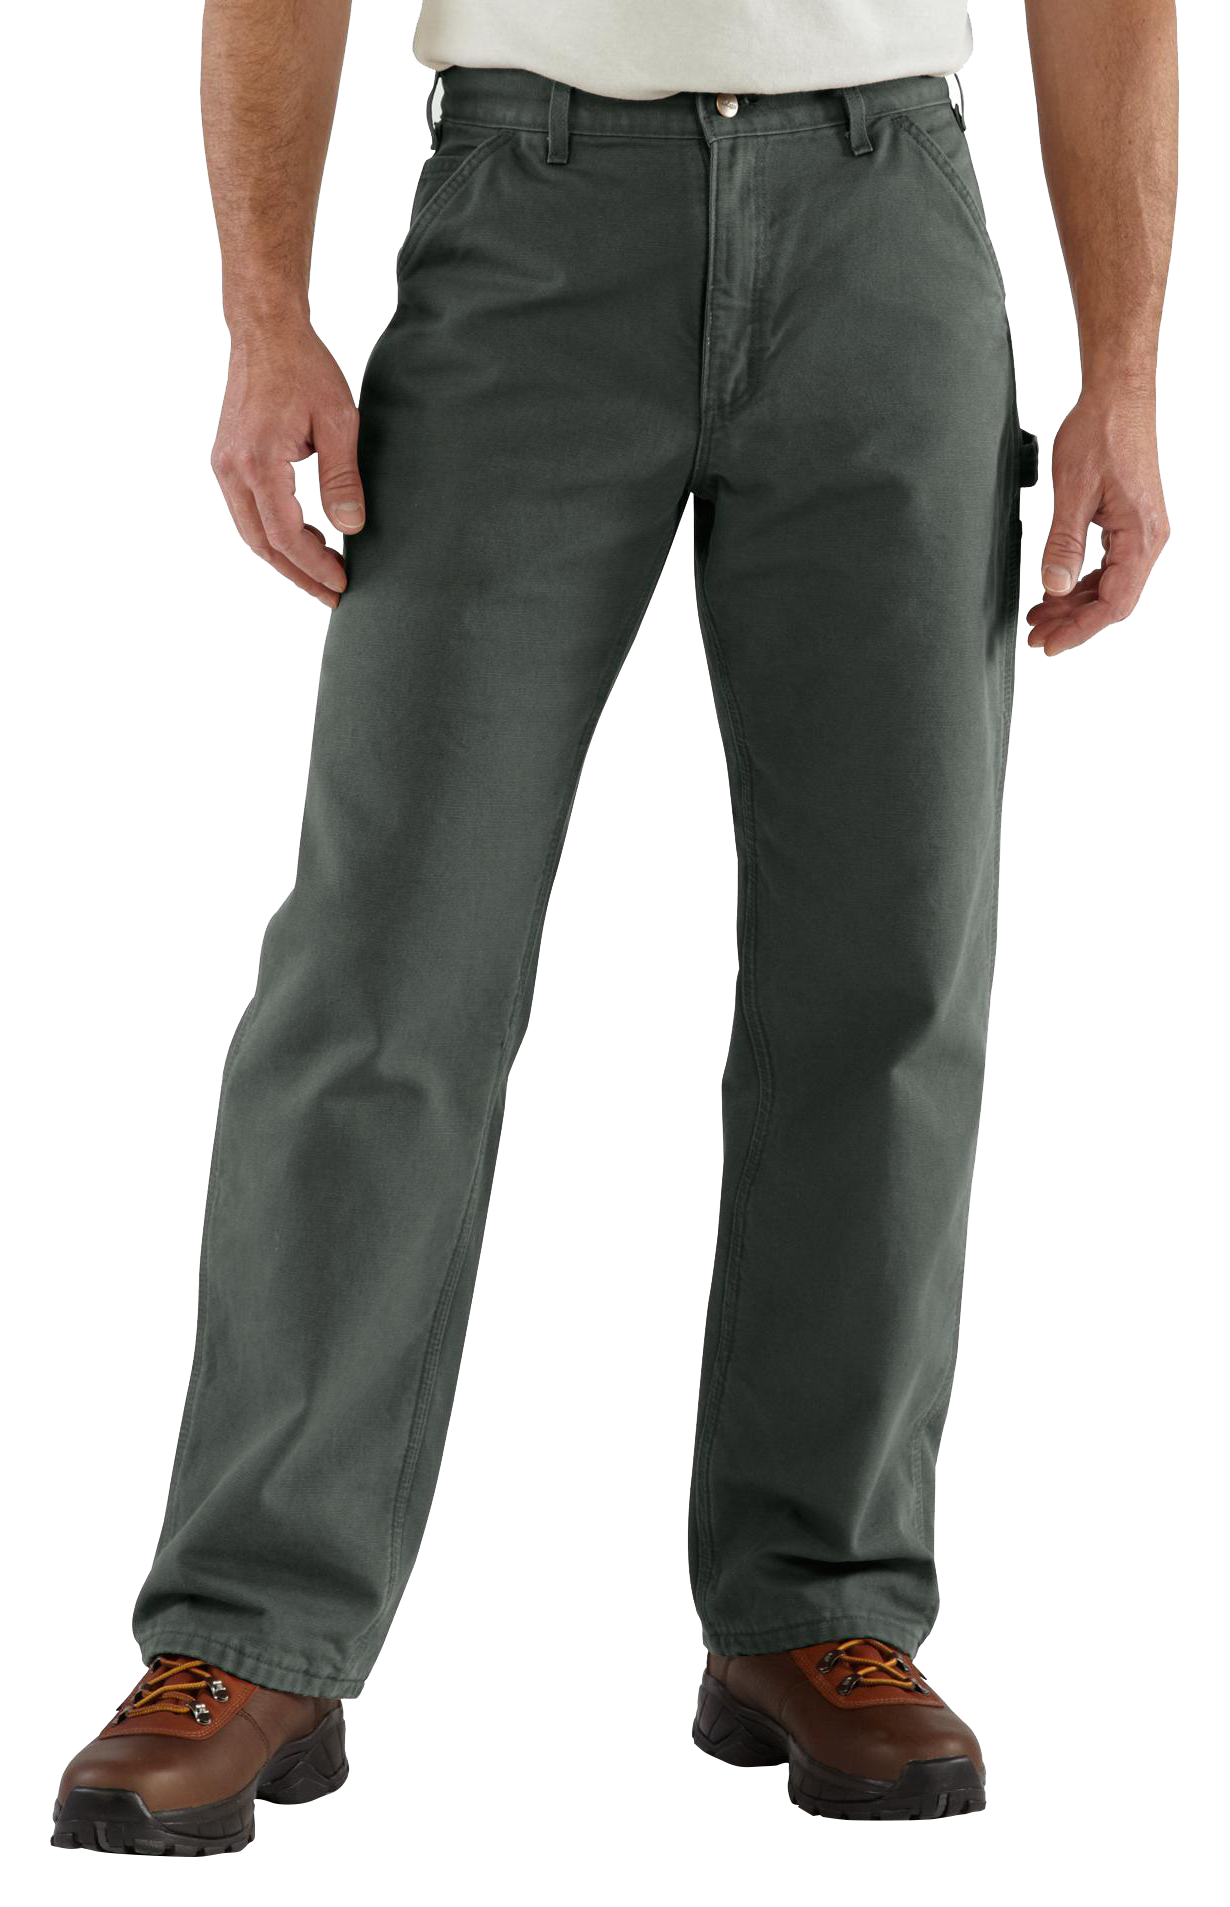 Carhartt® Men's Washed Duck 80G Insulated Pants - Big and Tall - Fort Brands